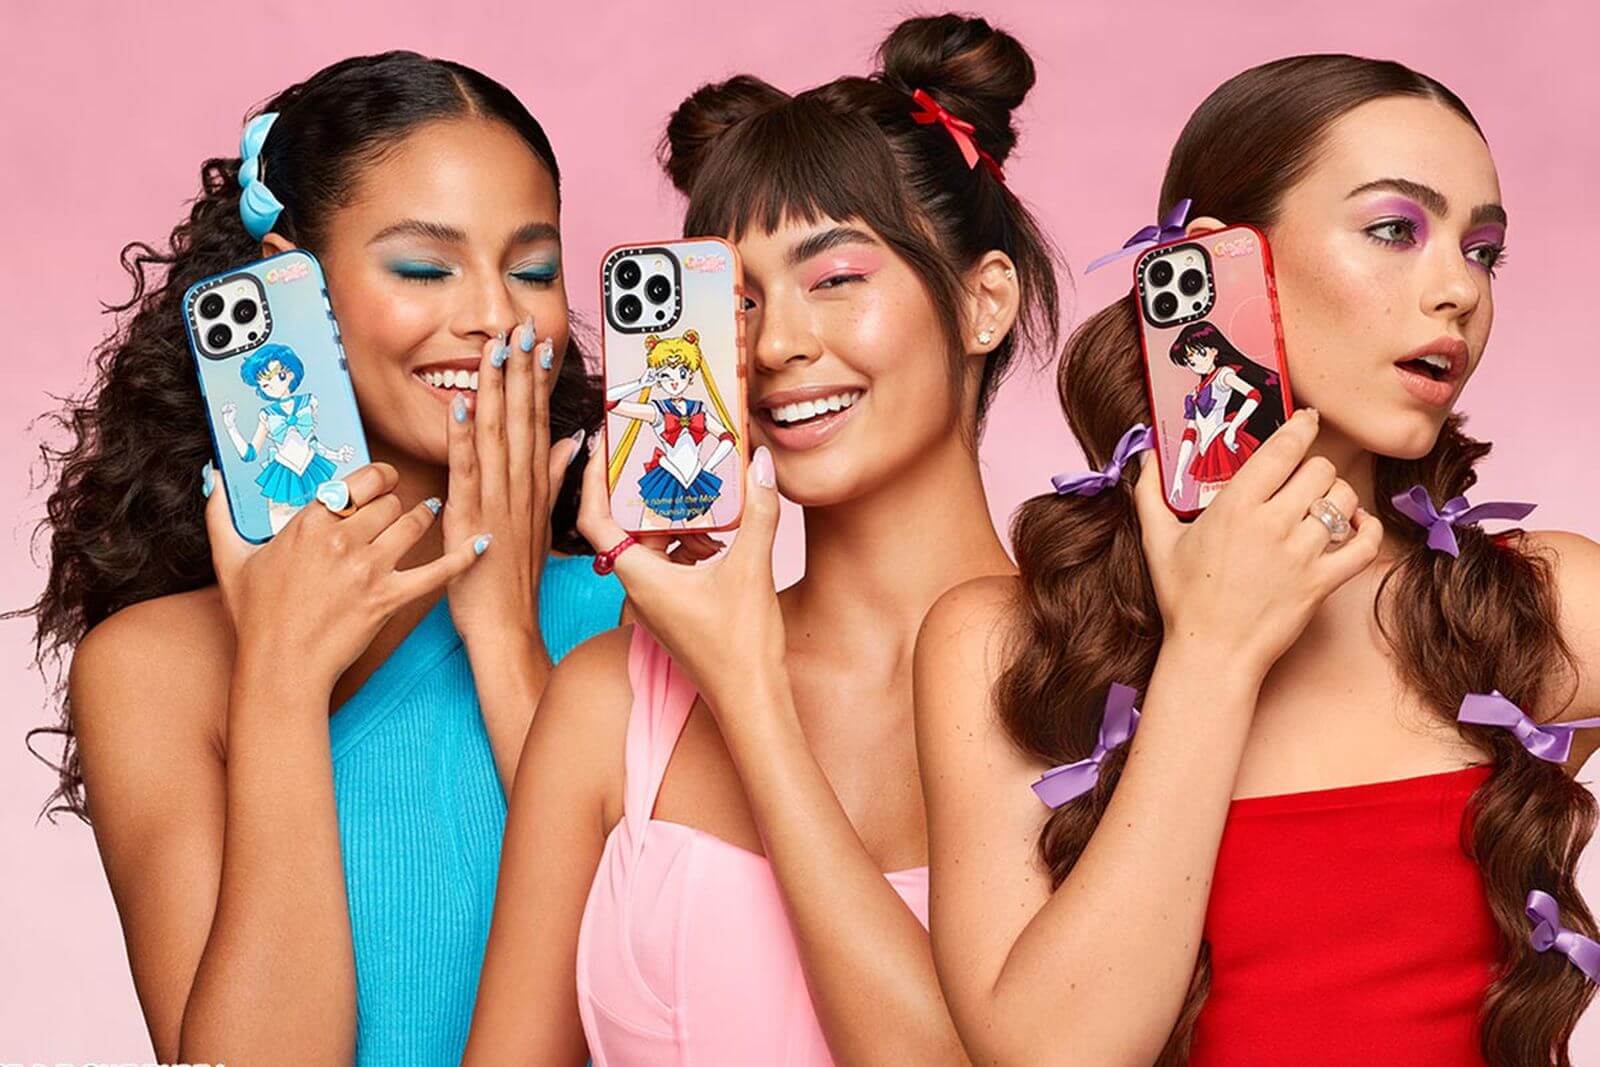 Dress Up Your Tech With The Sailor Moon x CASETiFY Collab